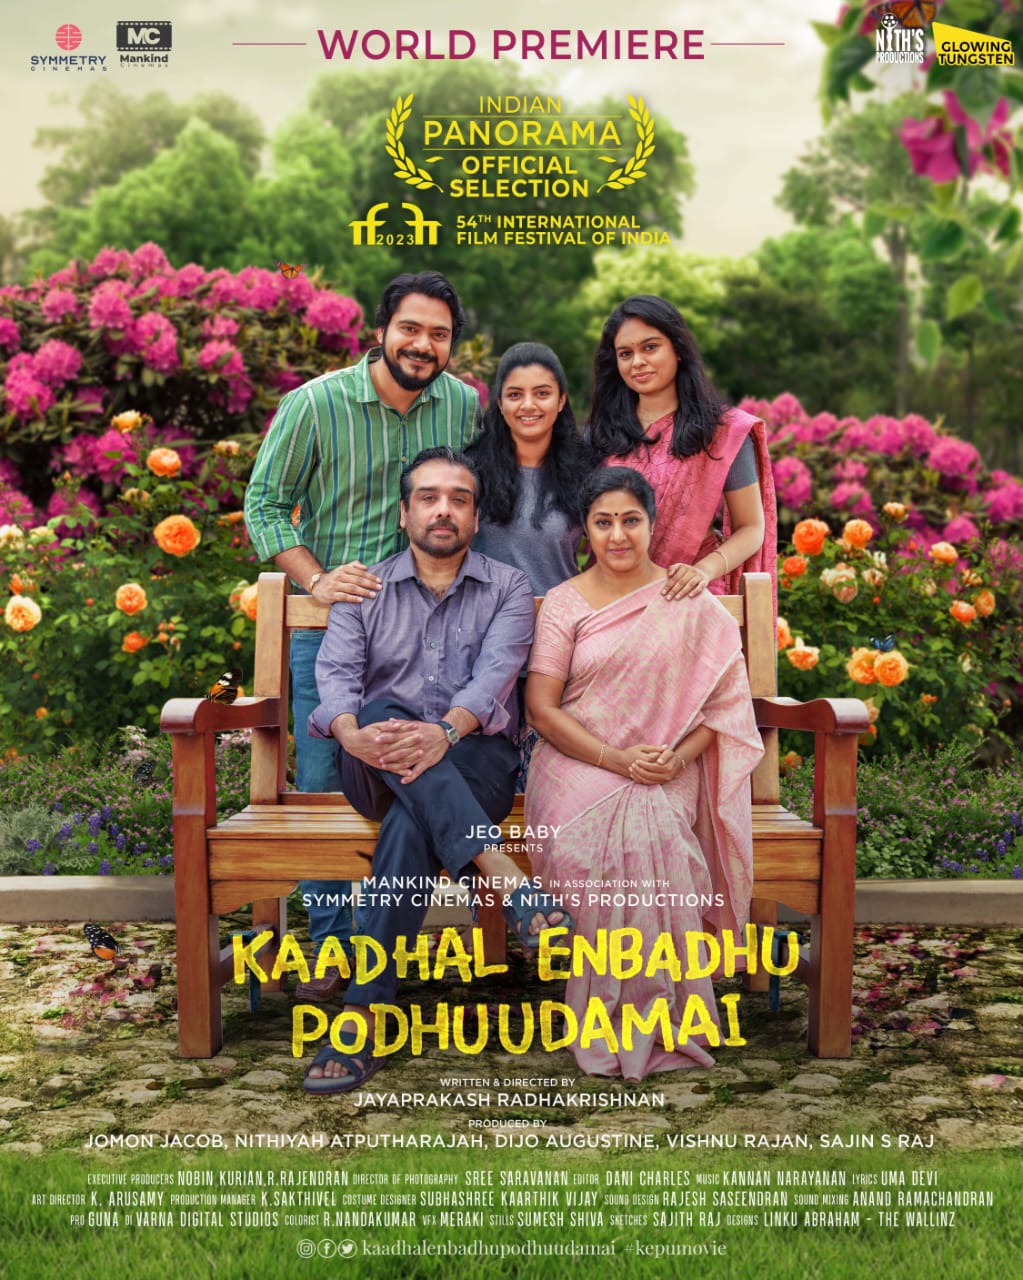 'Kadhal Enbadhu Podhu Udamai' has been officially selected under the Indian Panorama section of the 54 th International film festival of India